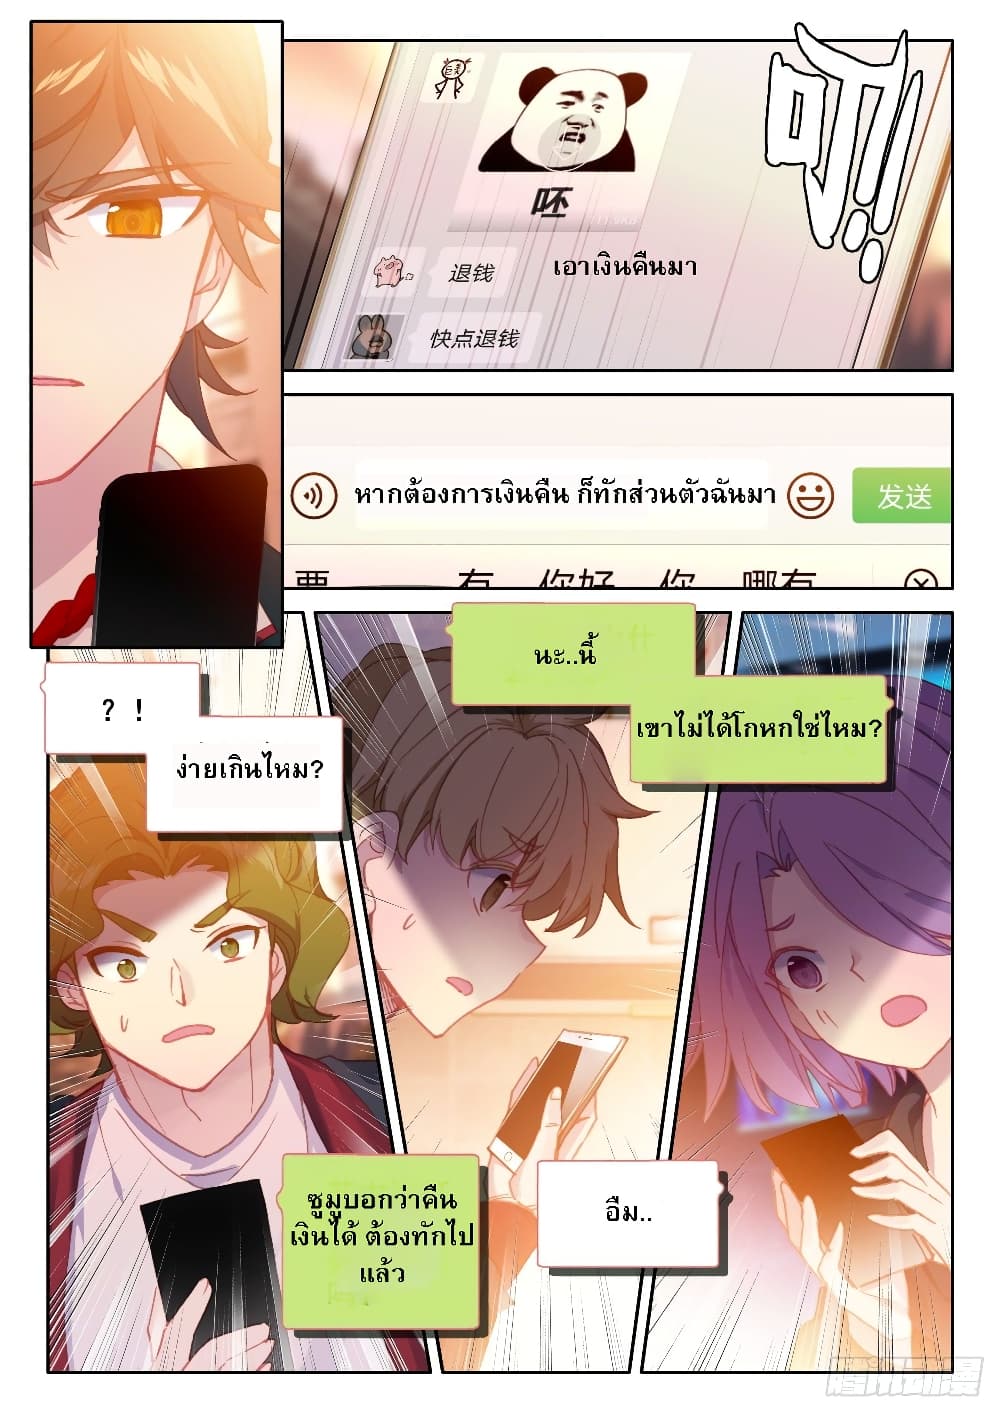 Becoming Immortal by Paying Cash ตอนที่ 7 (8)